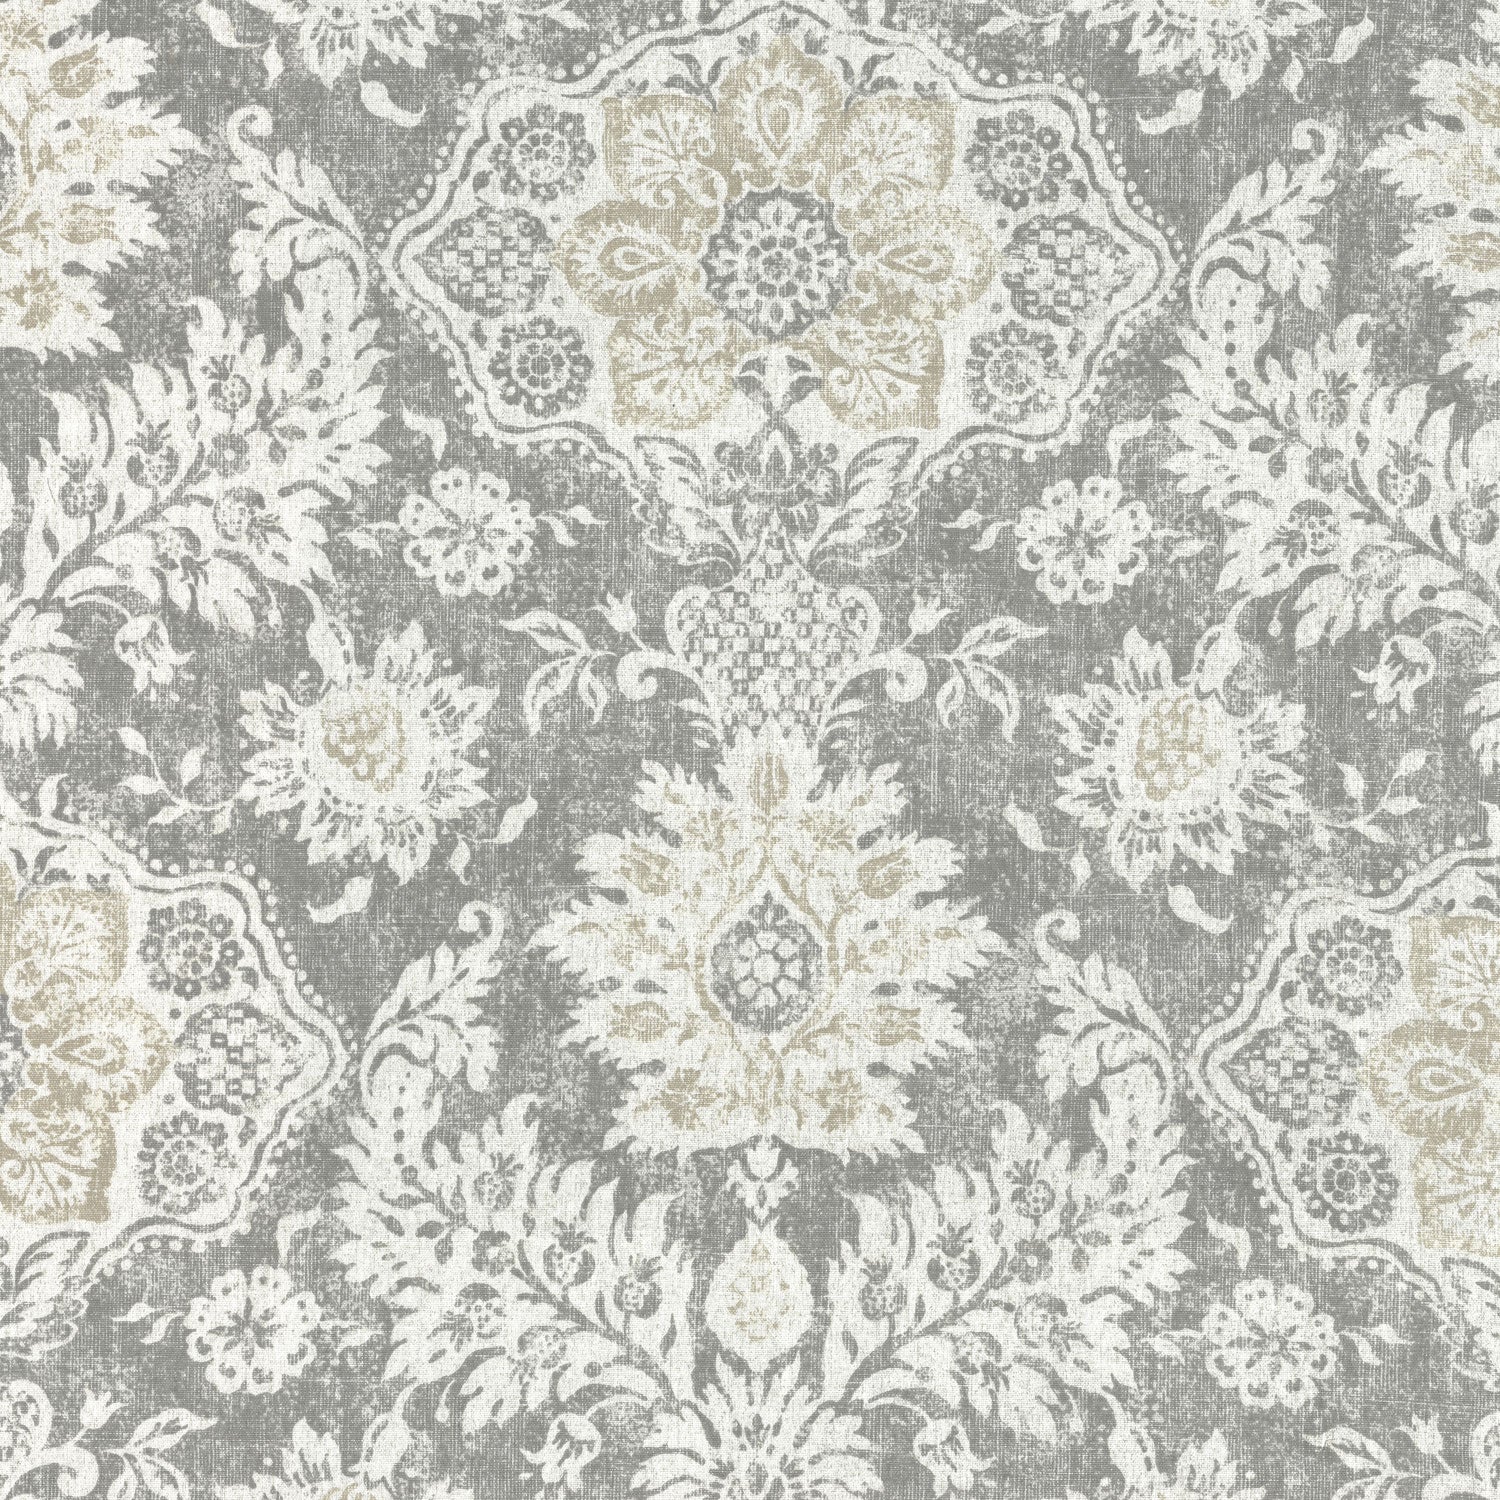 shower curtain in belmont mist pale gray floral damask